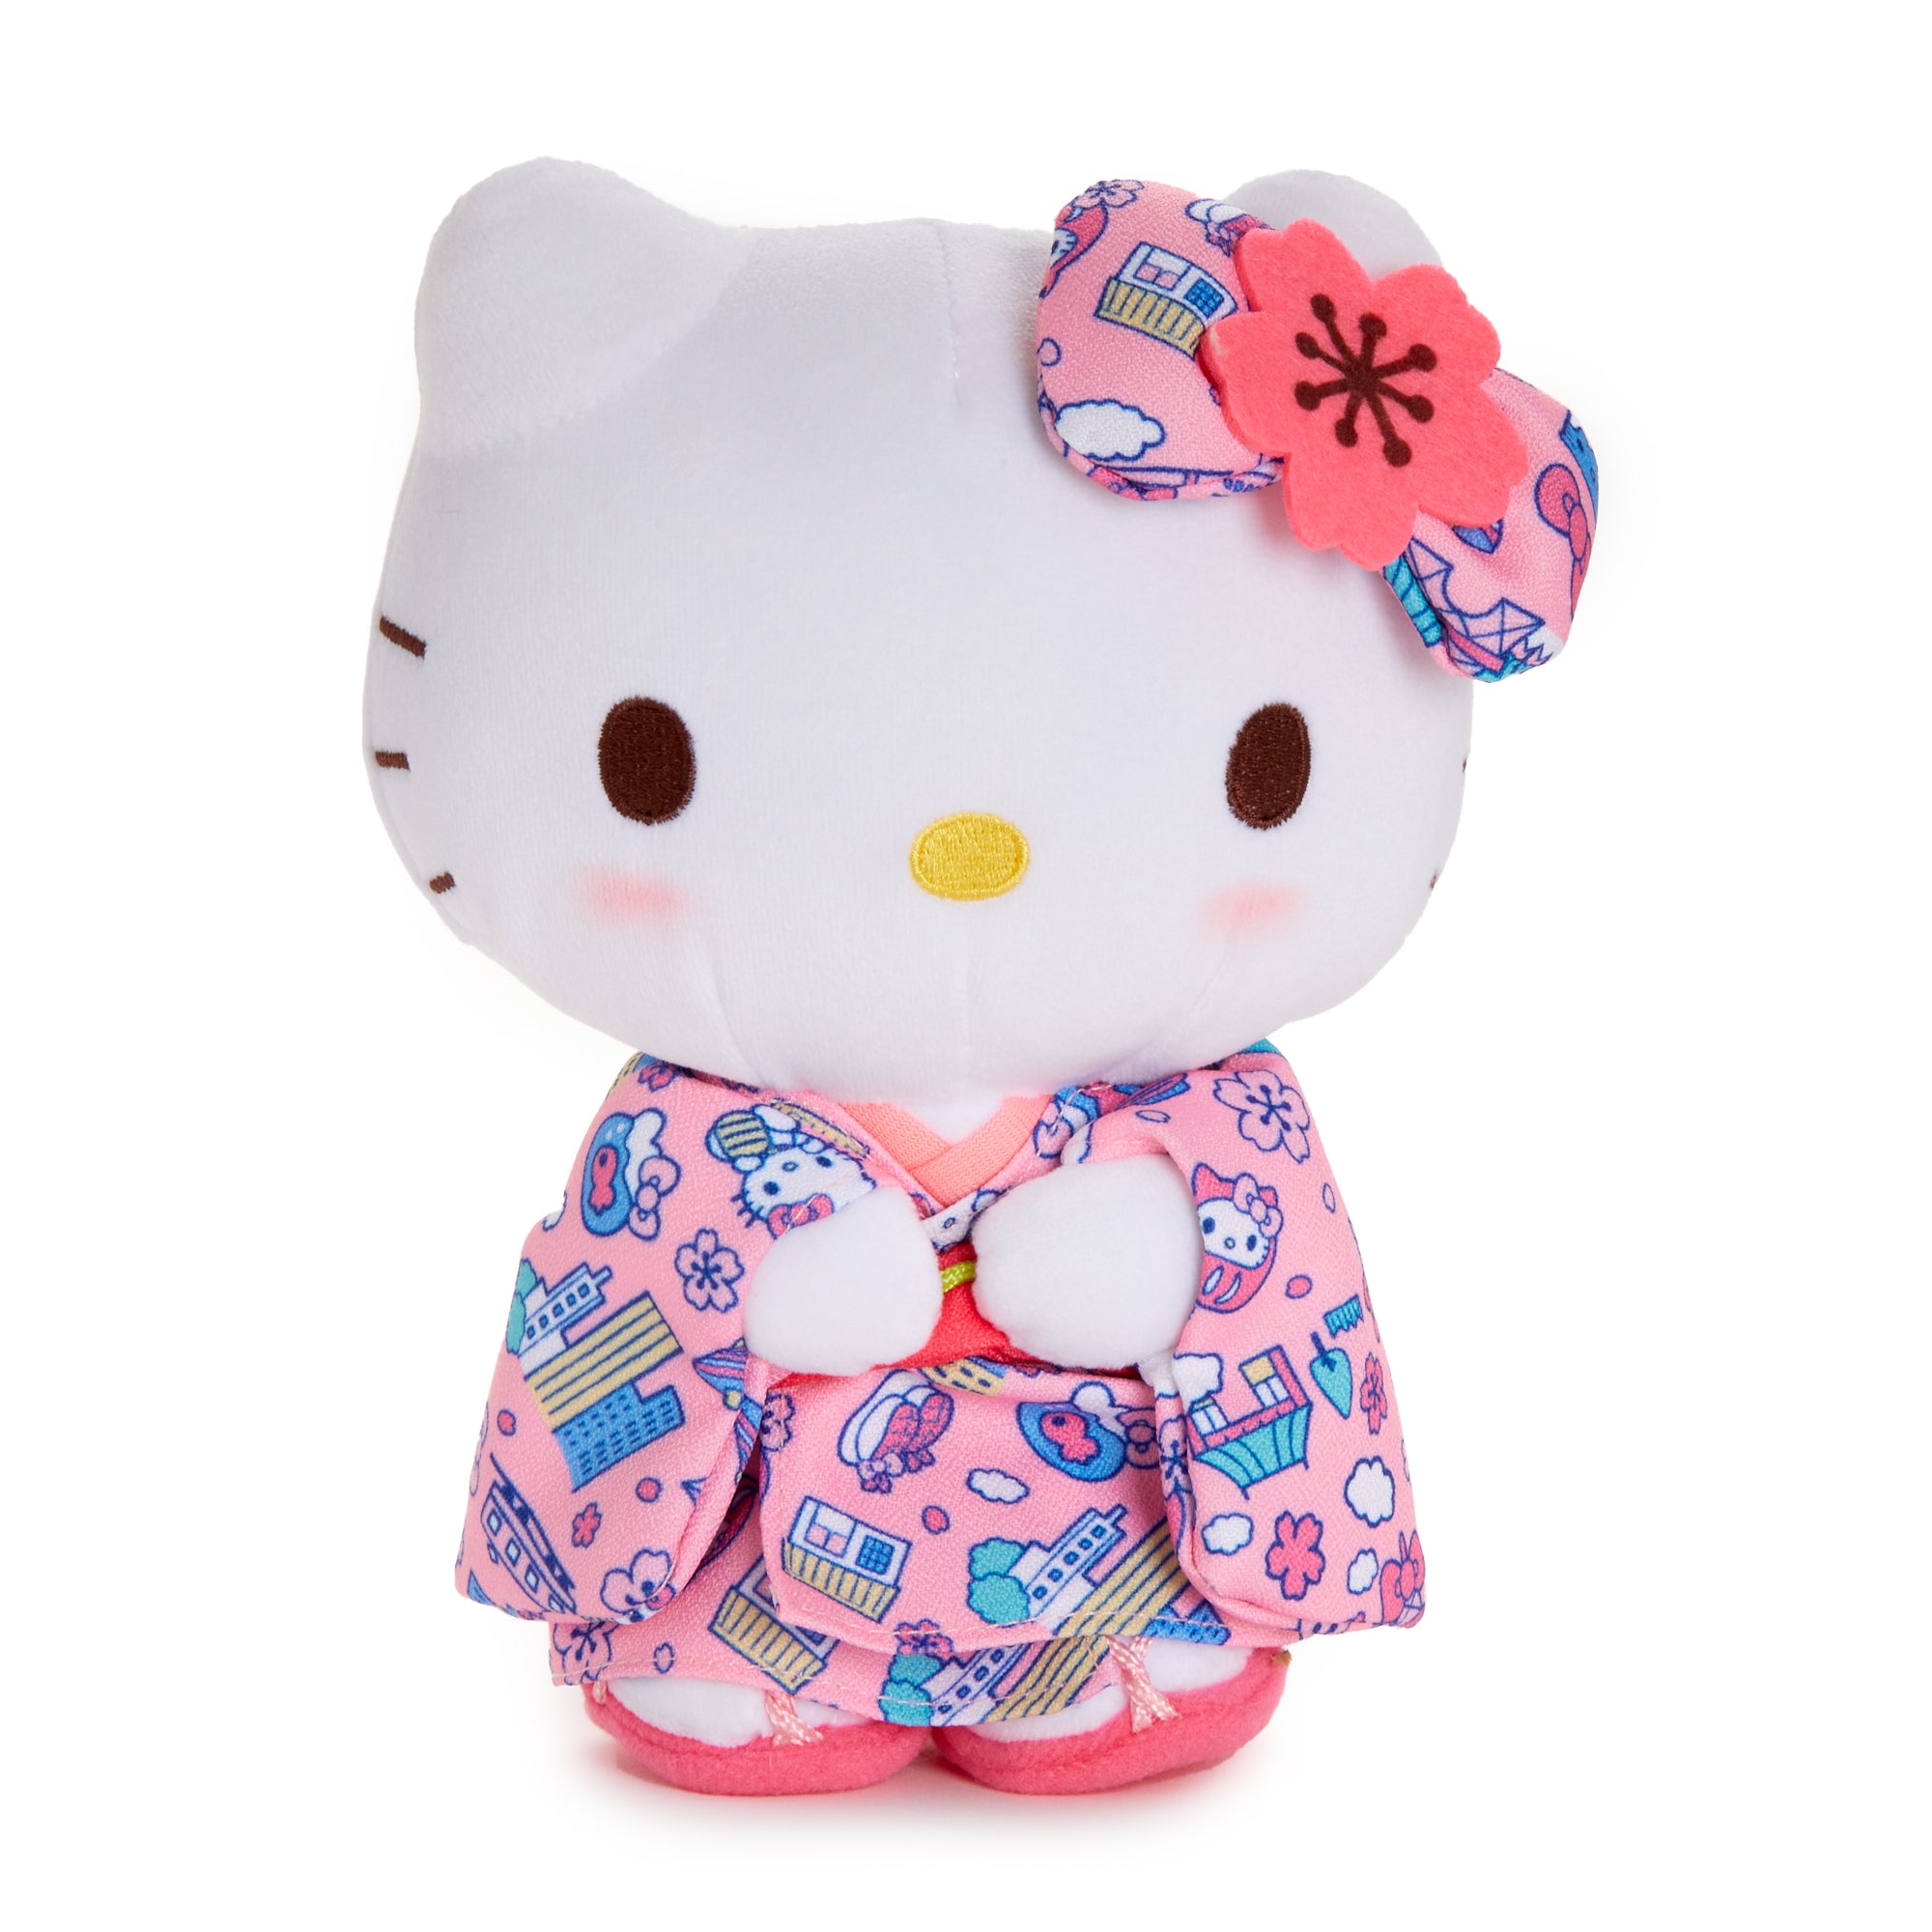 August 31, 2018, Tokyo, Japan - Japanese toy giant Tomy's doll Licca wears Hello  Kitty designed dress and a bag 